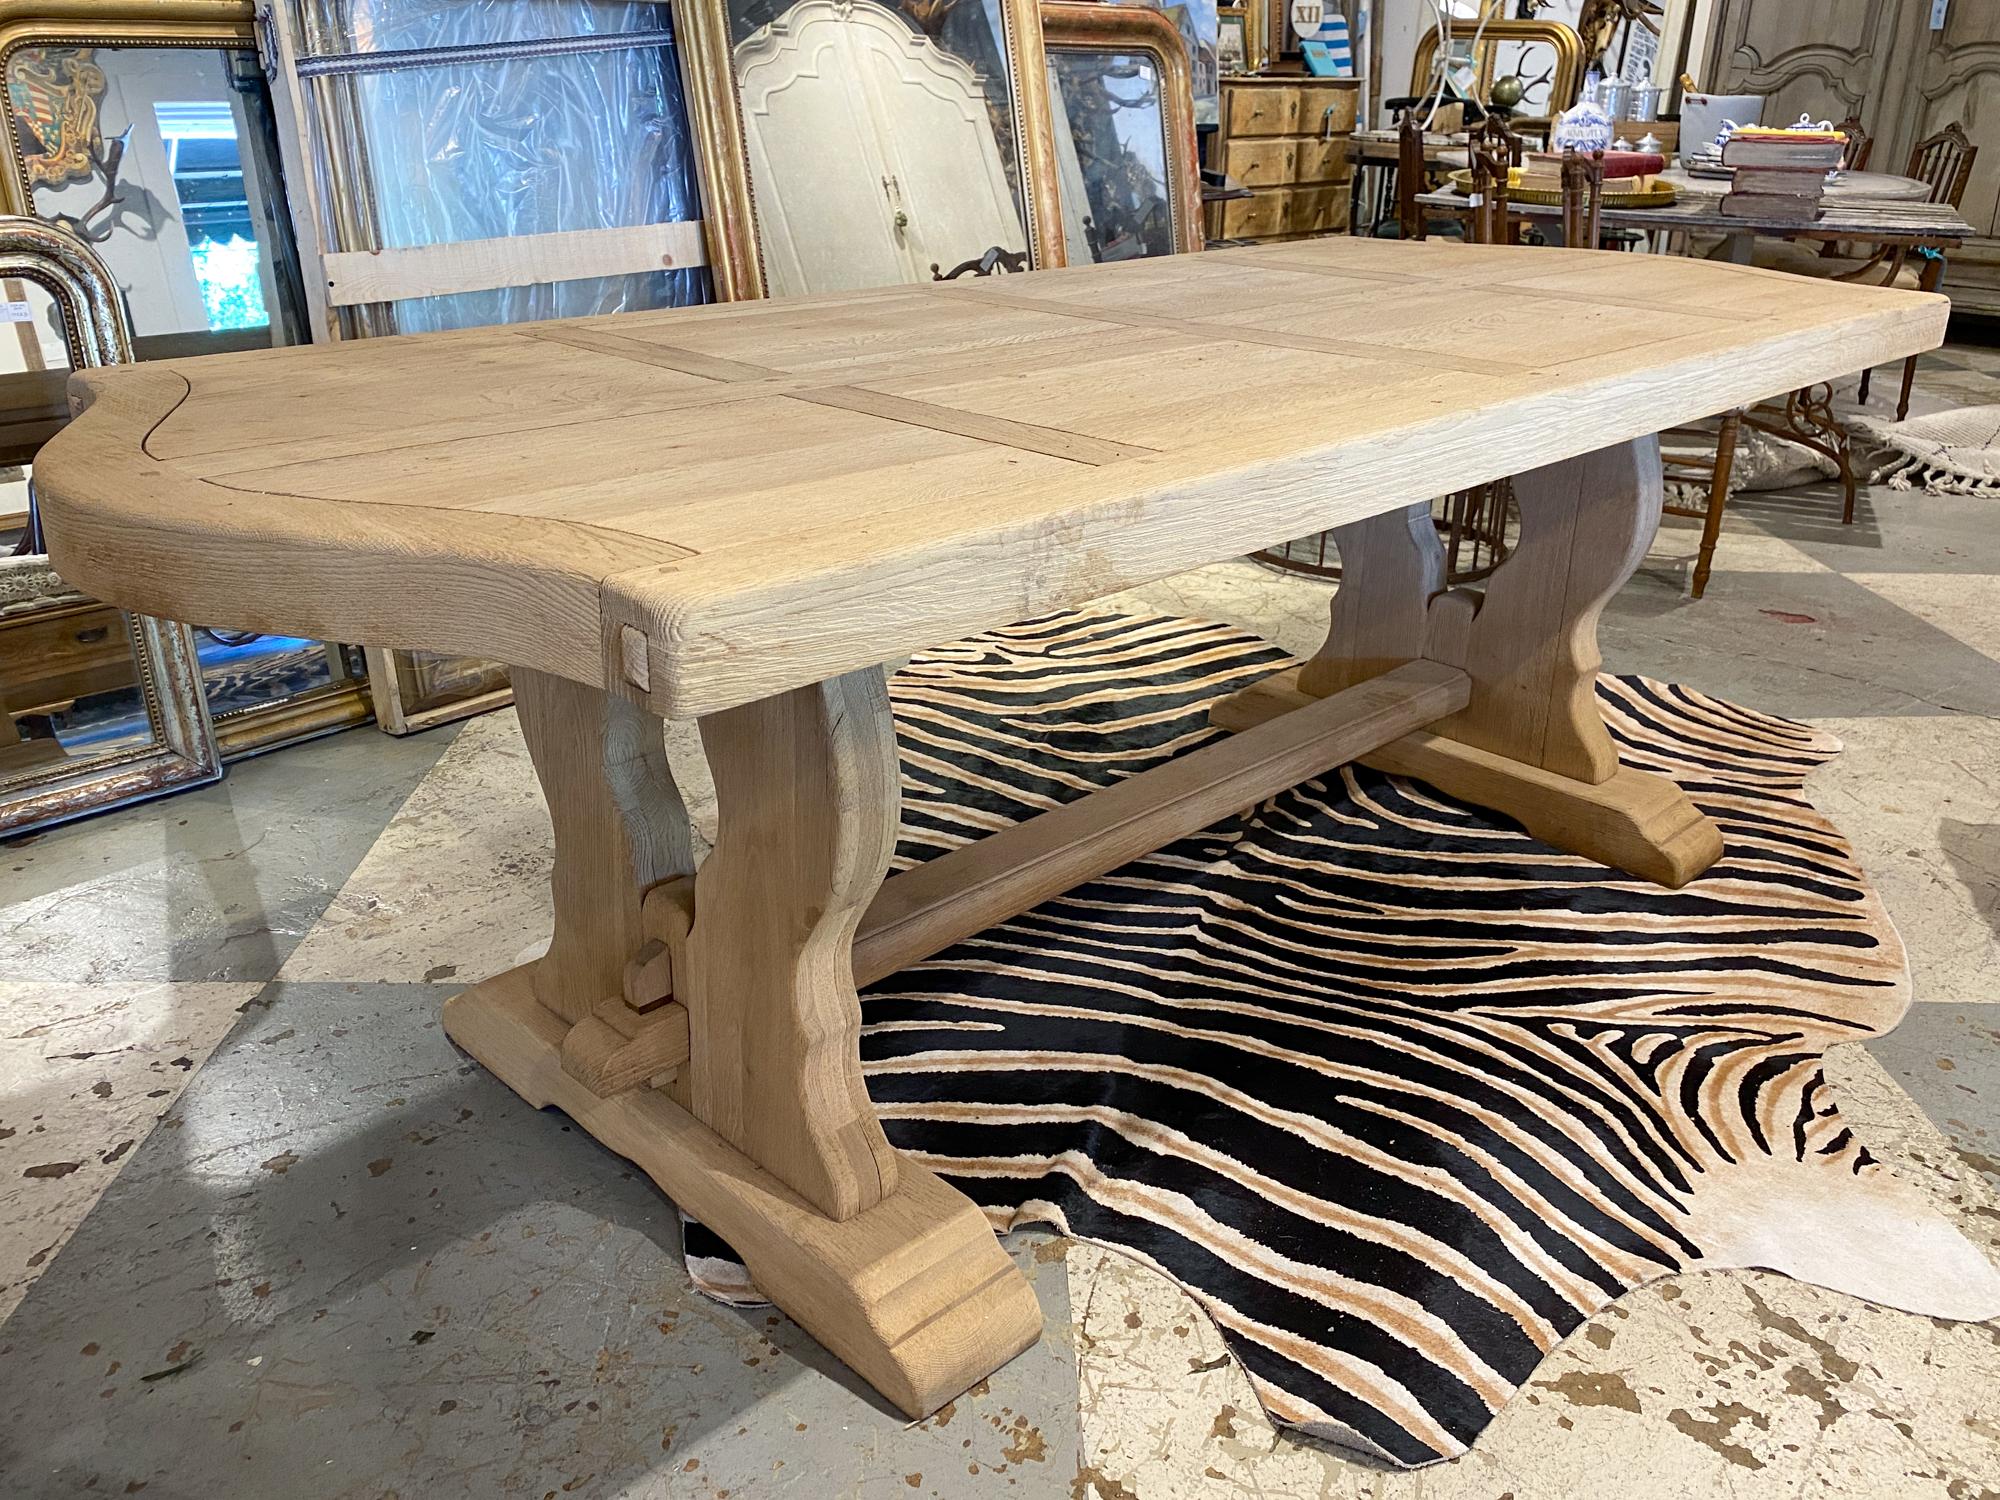 This is a vintage French oak dining table with a trestle style base and a curved edge tabletop. The top of this table also features a paned design pattern. The base and top can be separated for transport. The legs are joined with a solid rail which